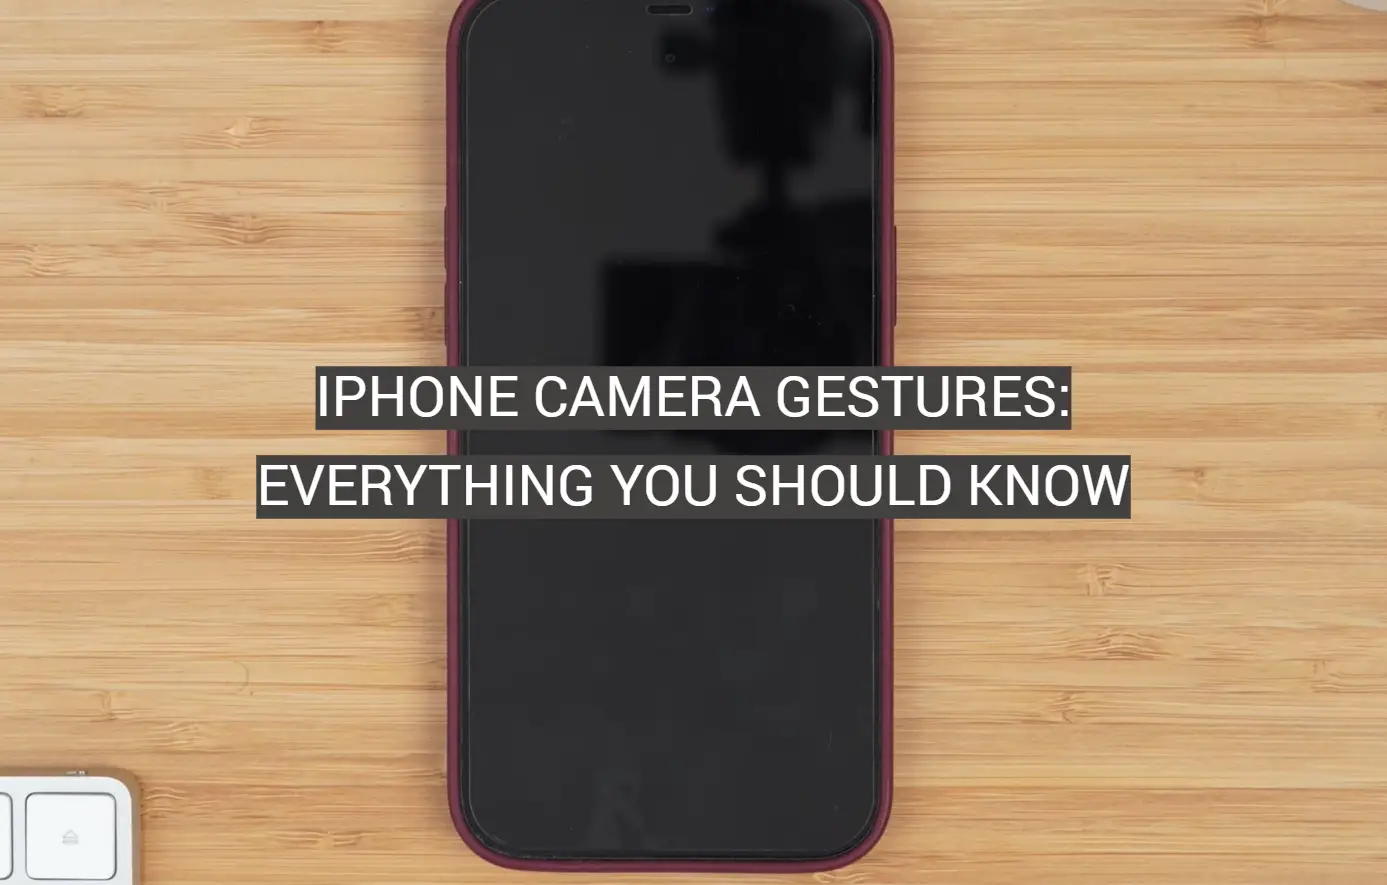 iPhone Camera Gestures: Everything You Should Know